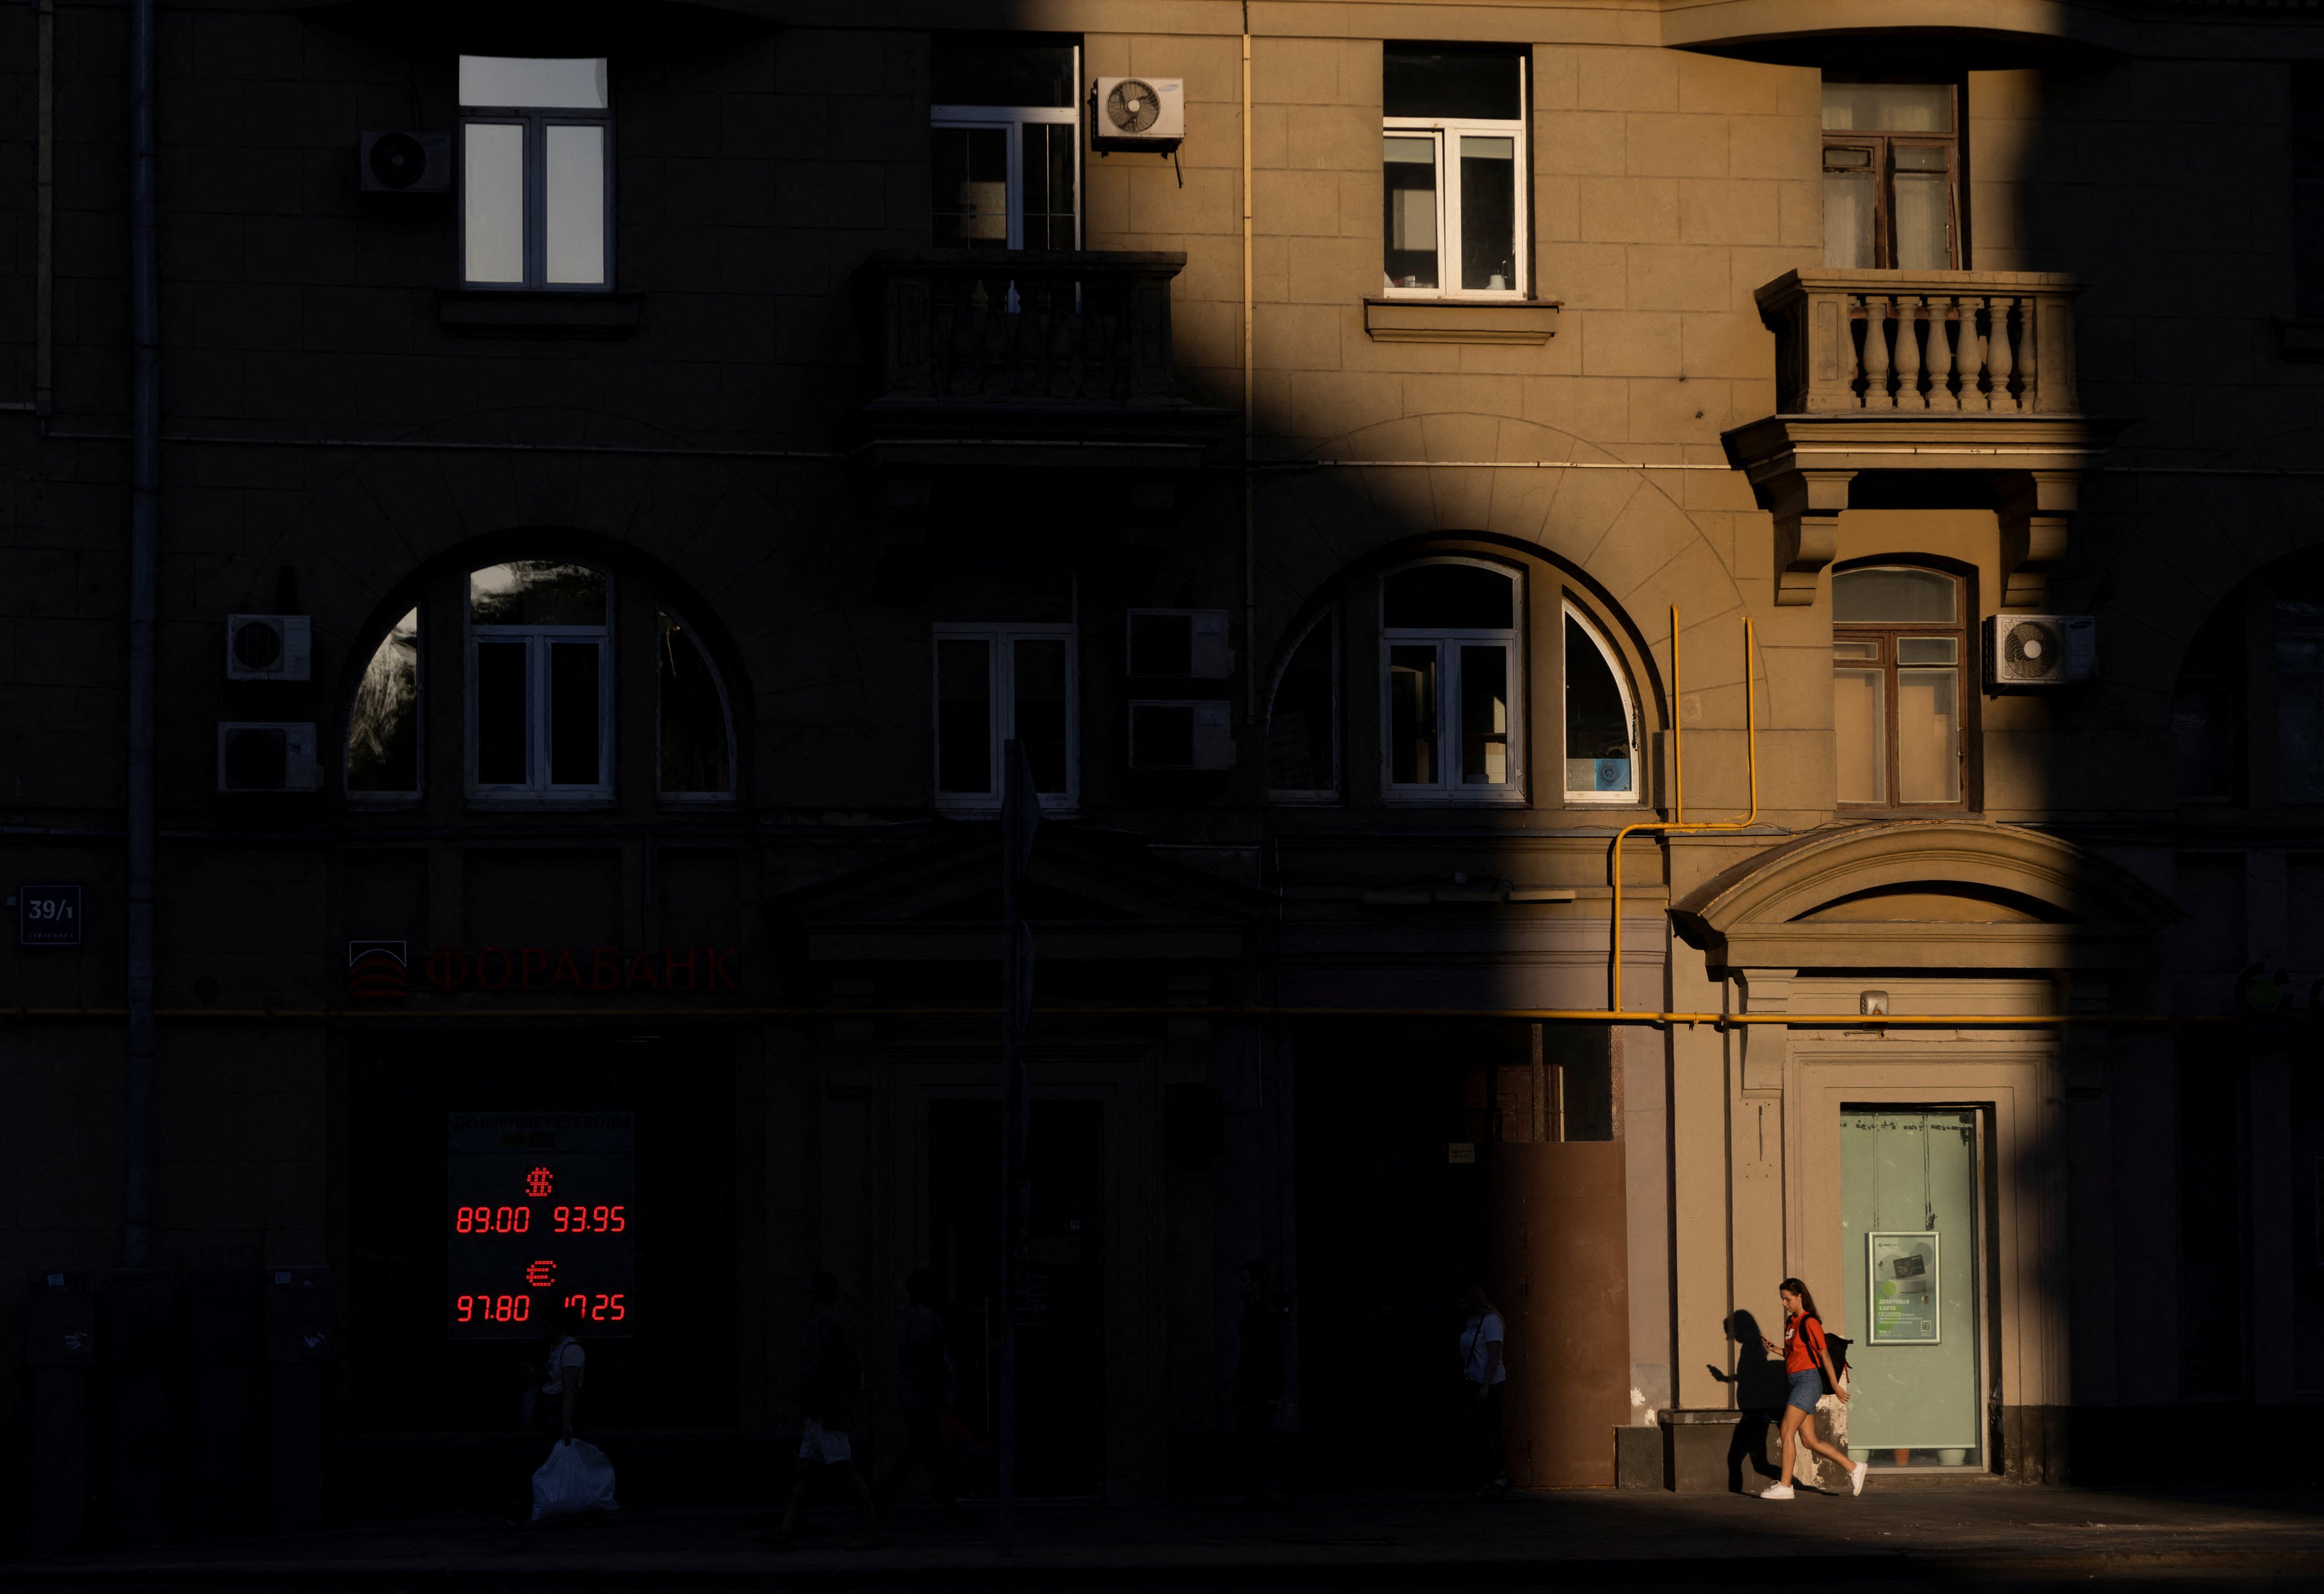 People walk next to a board showing currency exchange rates of the US dollar and euro against Russian rouble in a street in Moscow, Russia, on August 17. Photo: Reuters